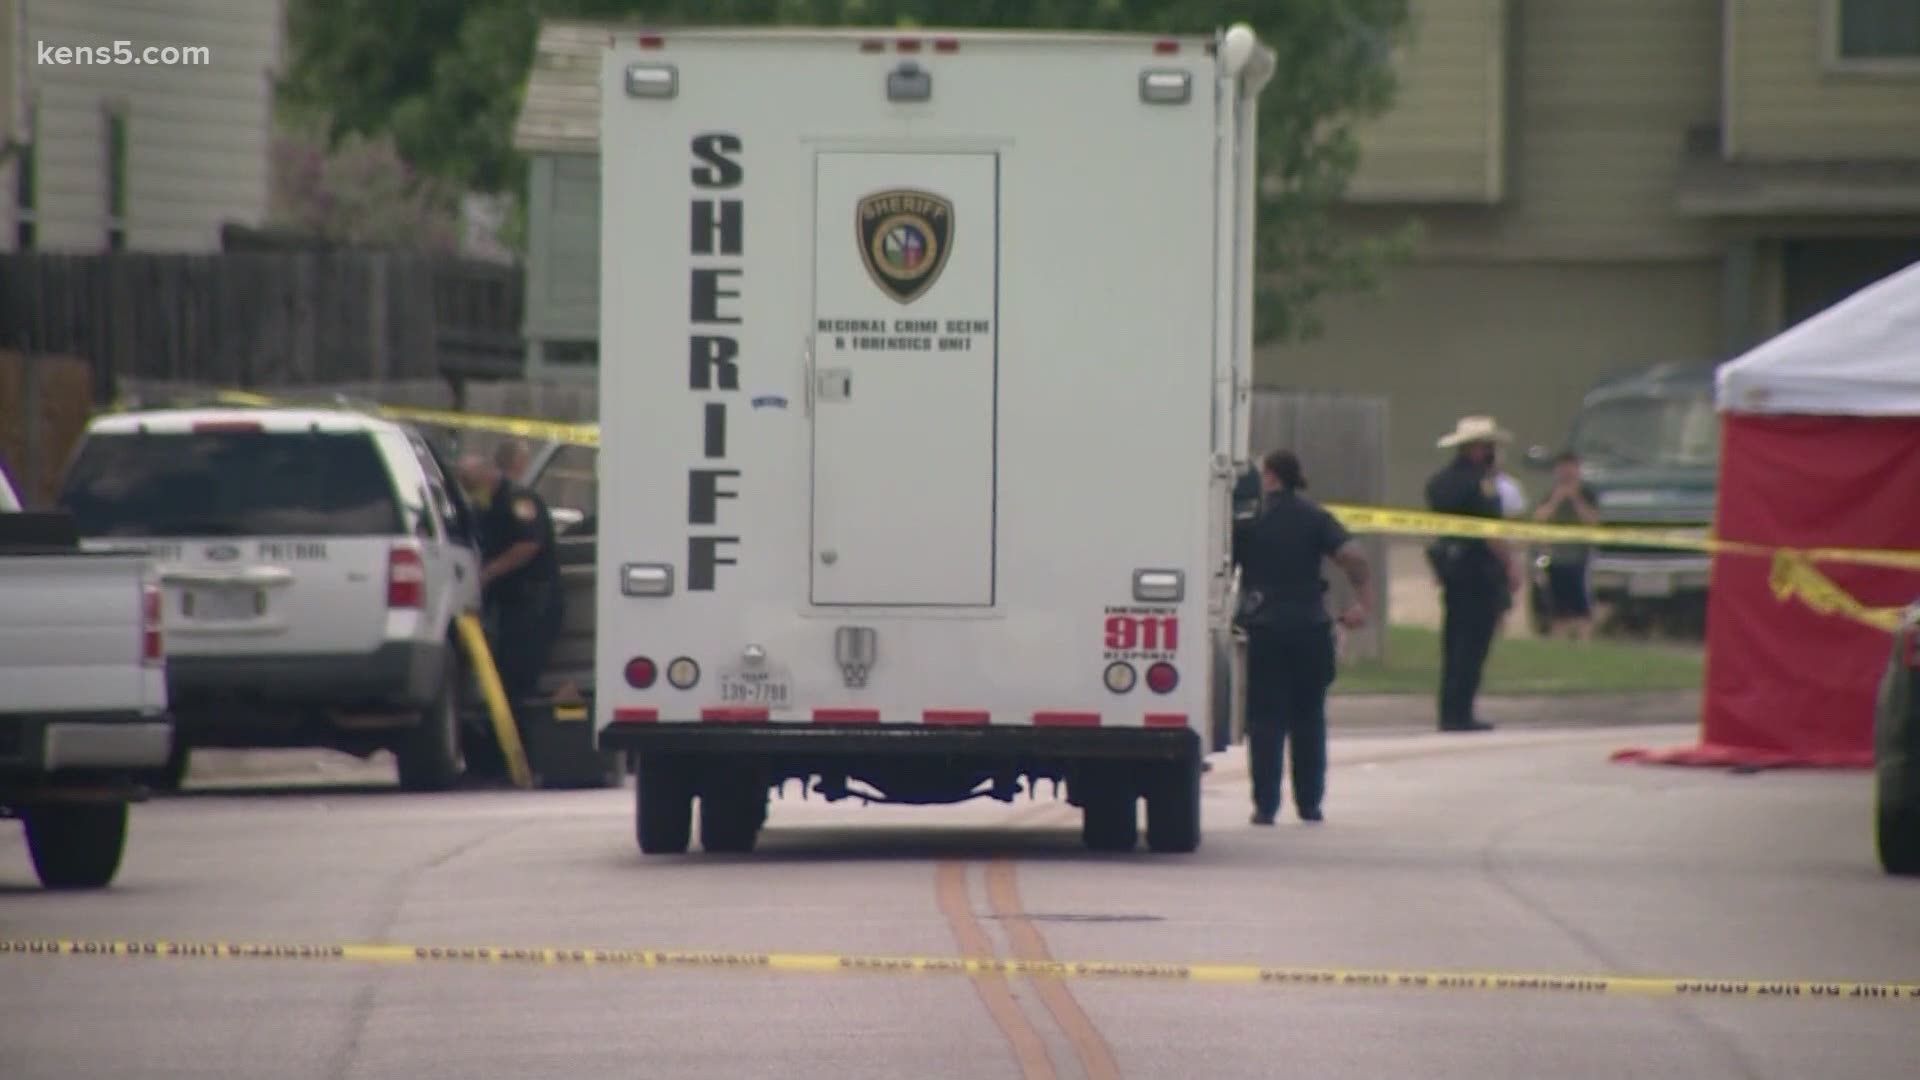 San Antonio-area authorities say the homicide may have started as a domestic argument. One man is in custody.